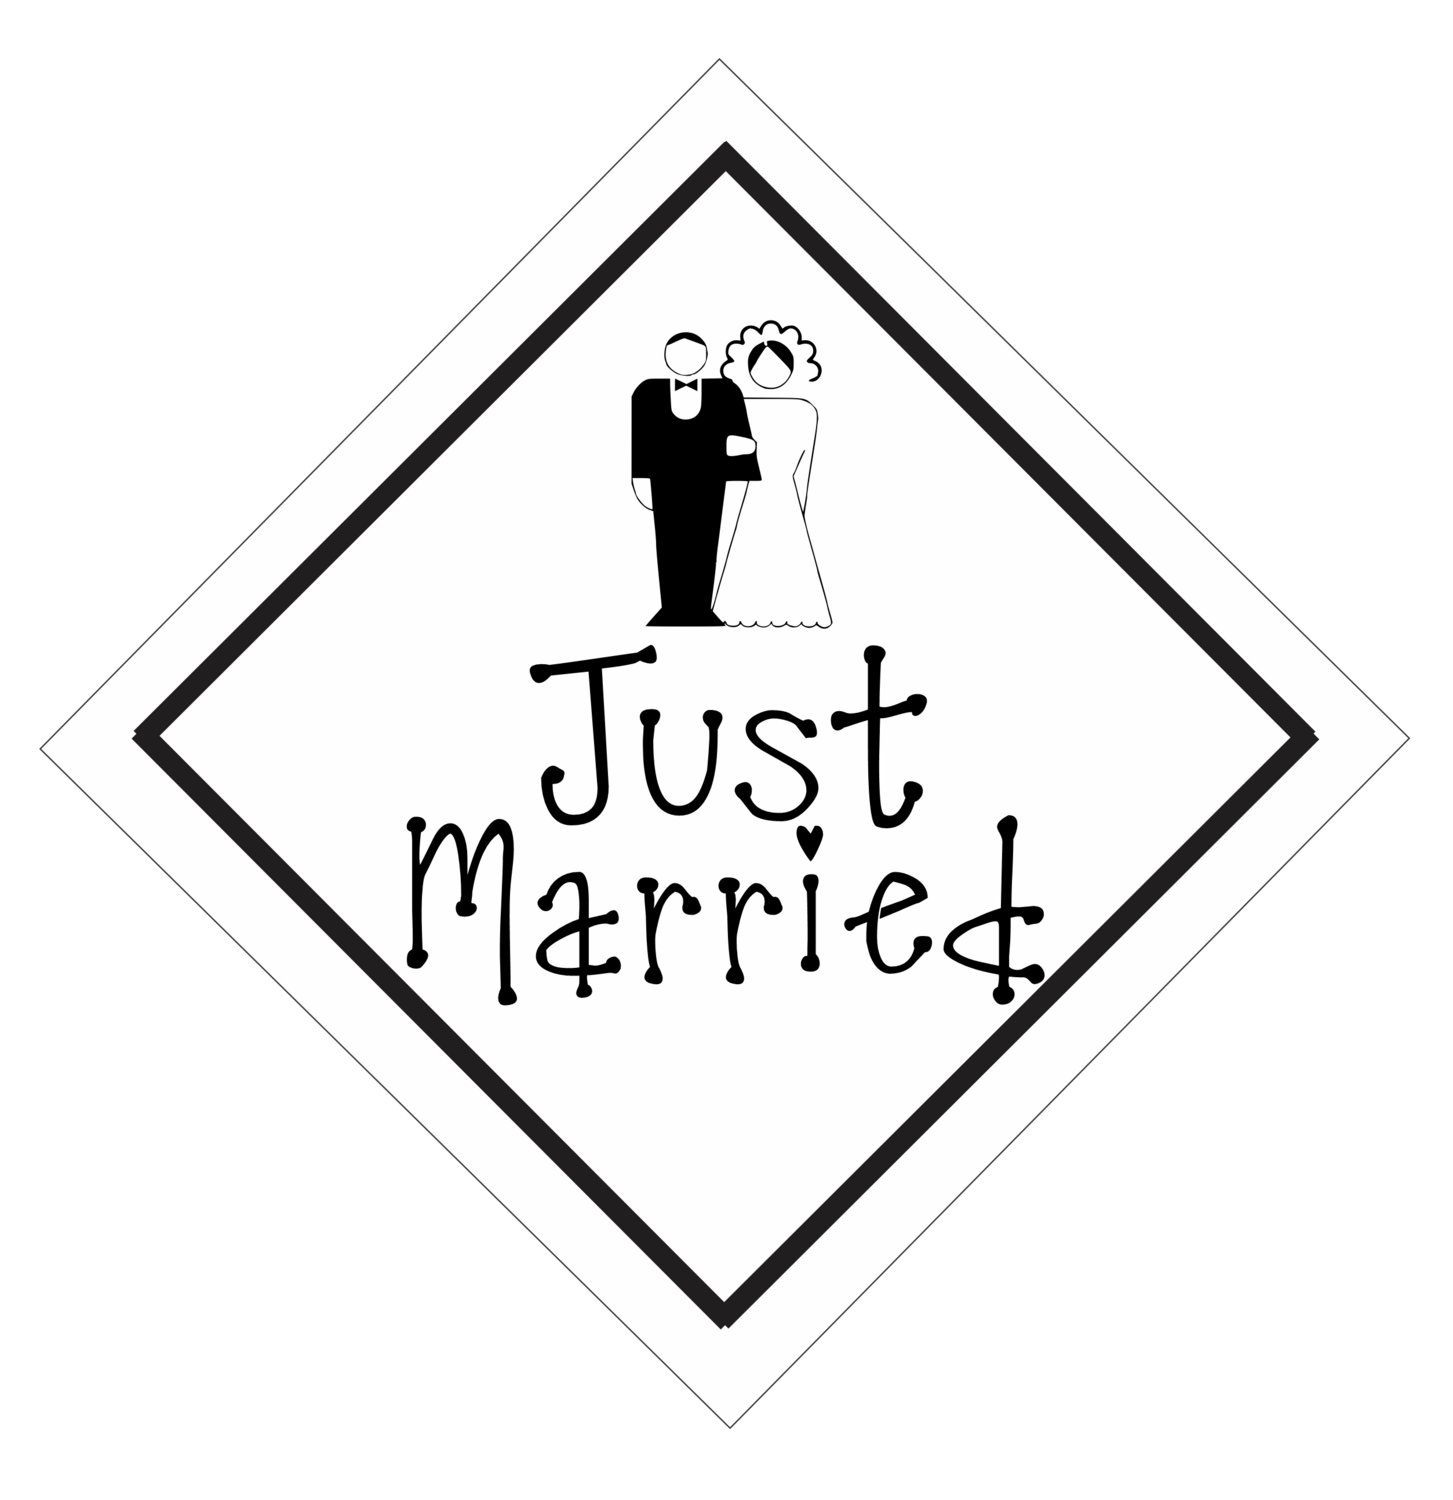 Just Married Car Sign or Sticker